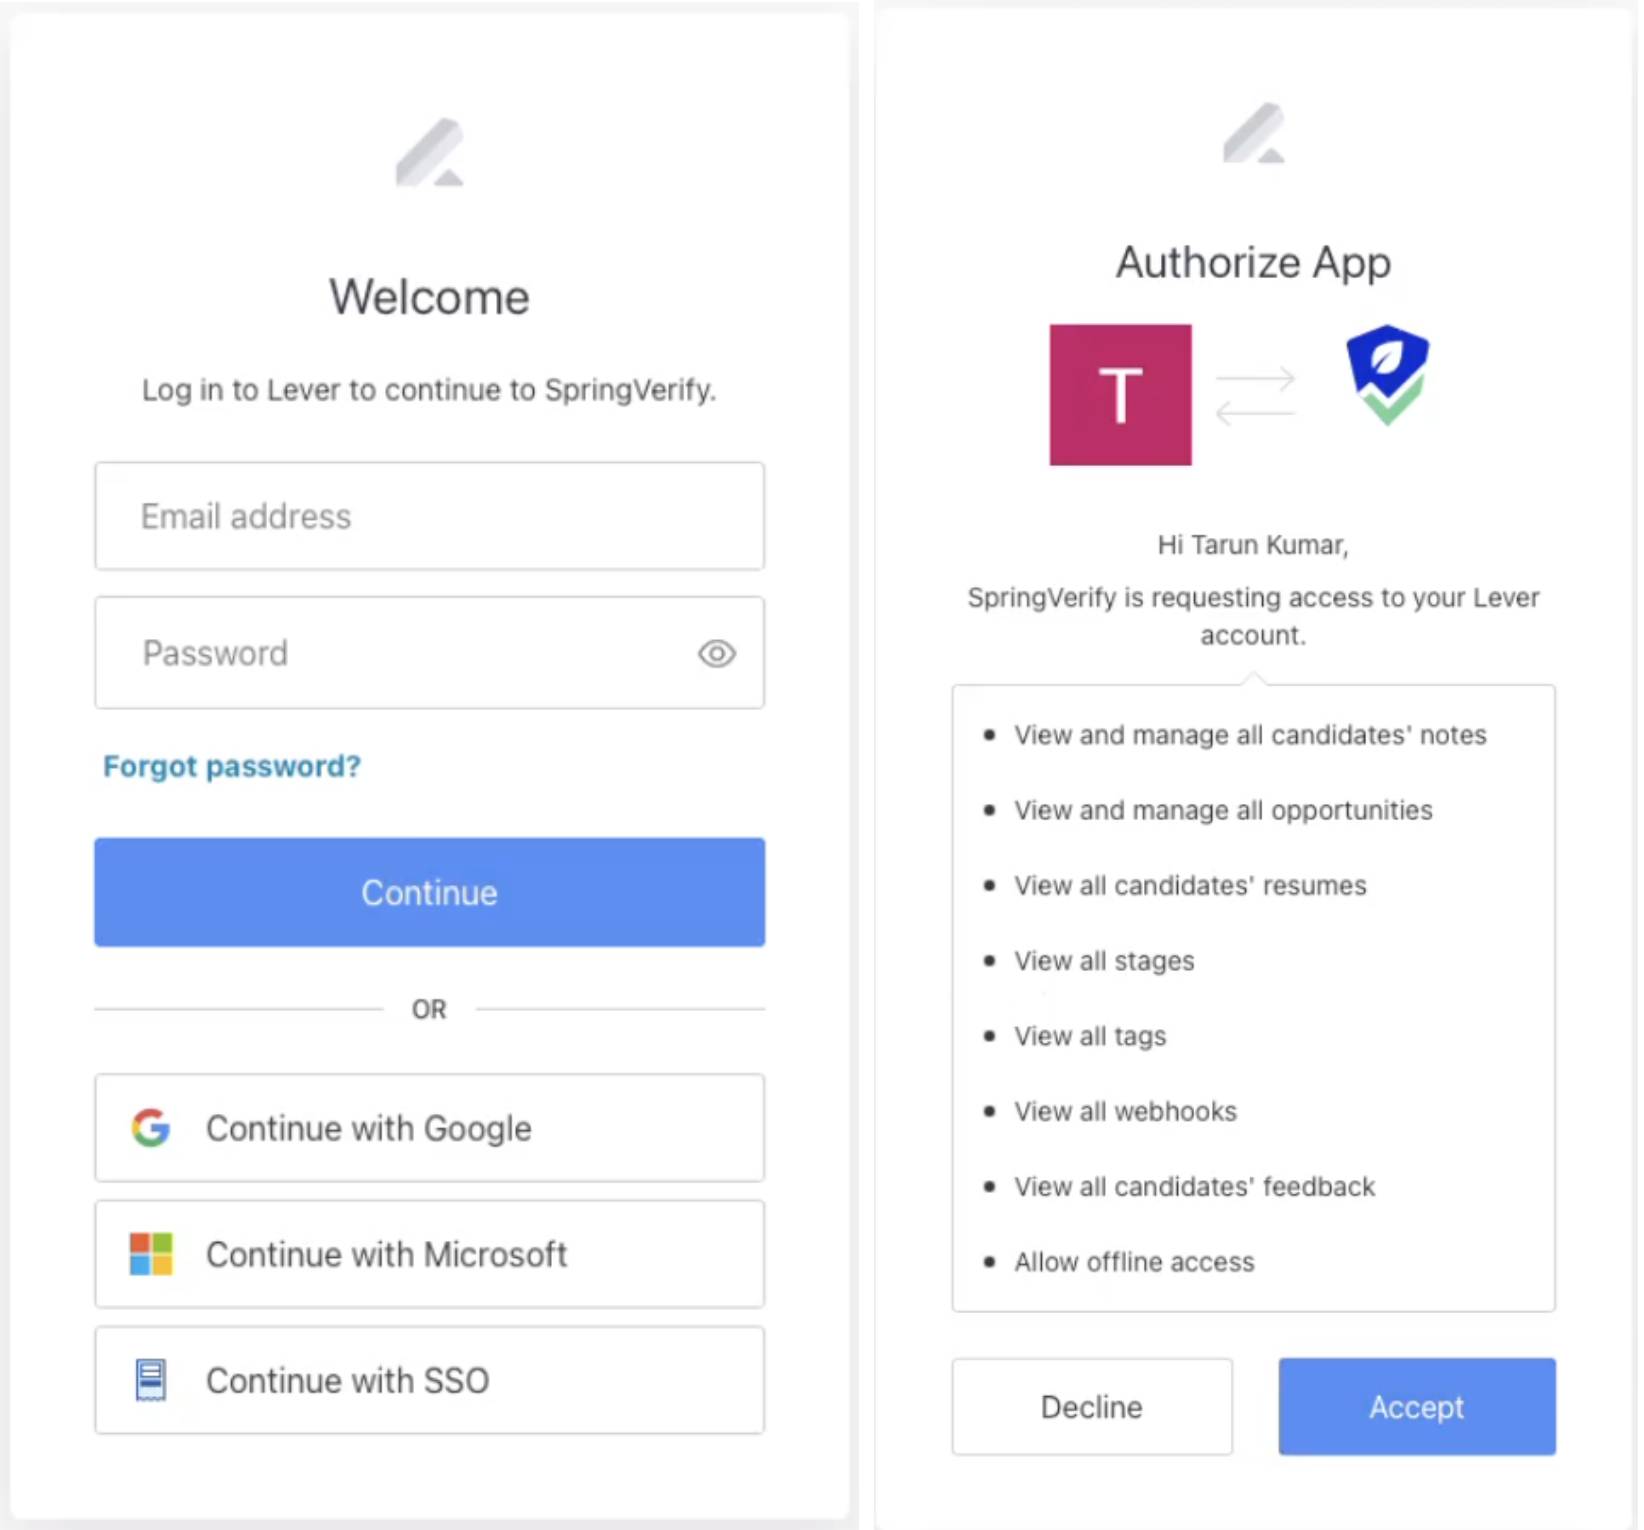 Two frames. Left frame: Lever login modal. Right frame: App authorization modal with listed permissions